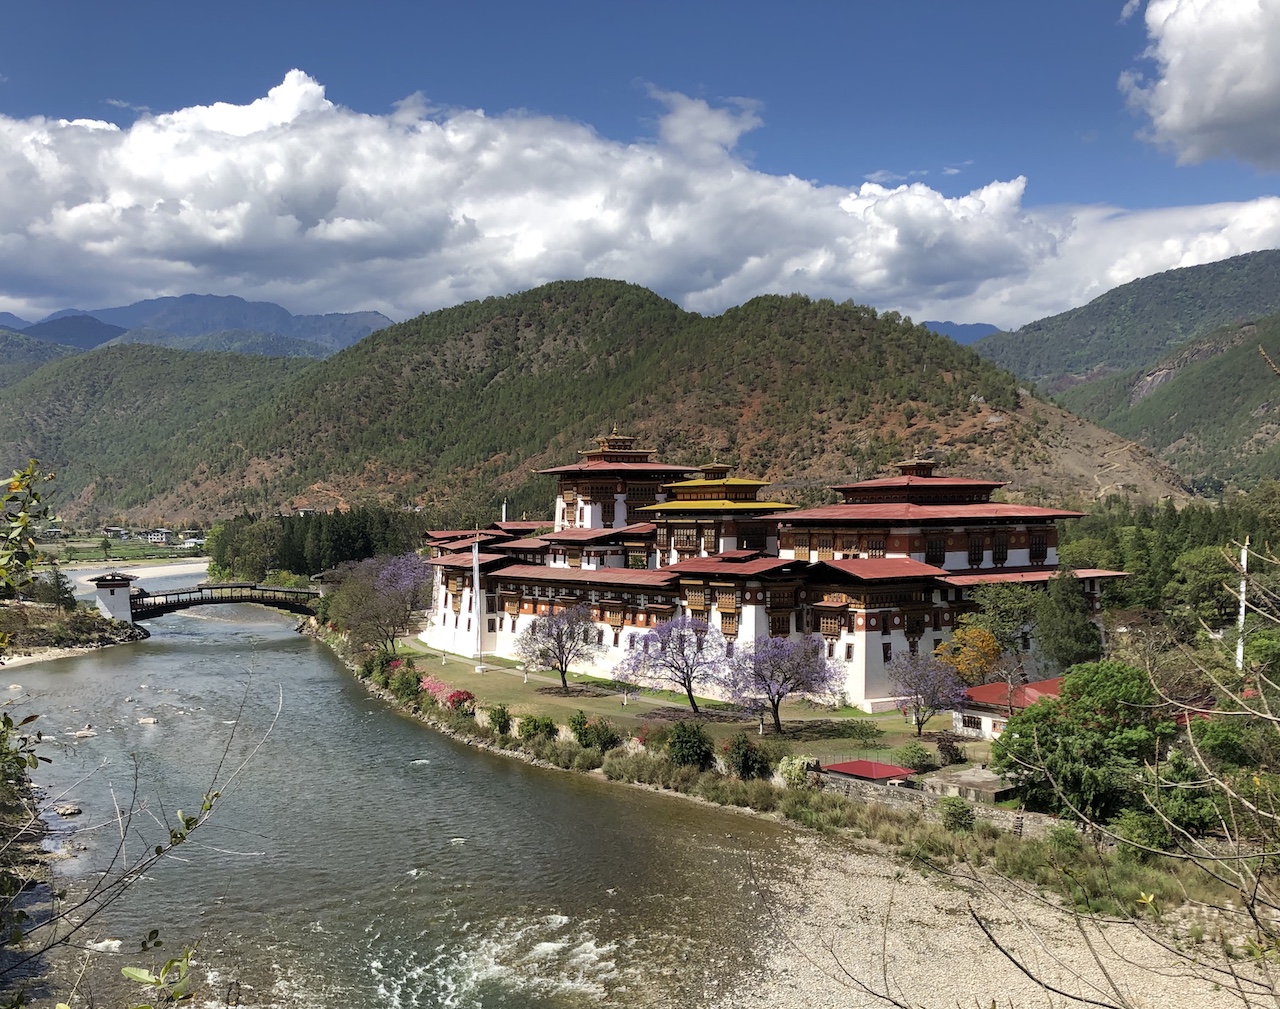 In March 2022, following two years of extensive restoration, the Kingdom of Bhutan will reopen the historic and sacred Trans Bhutan Trail for the first time in 60 years.